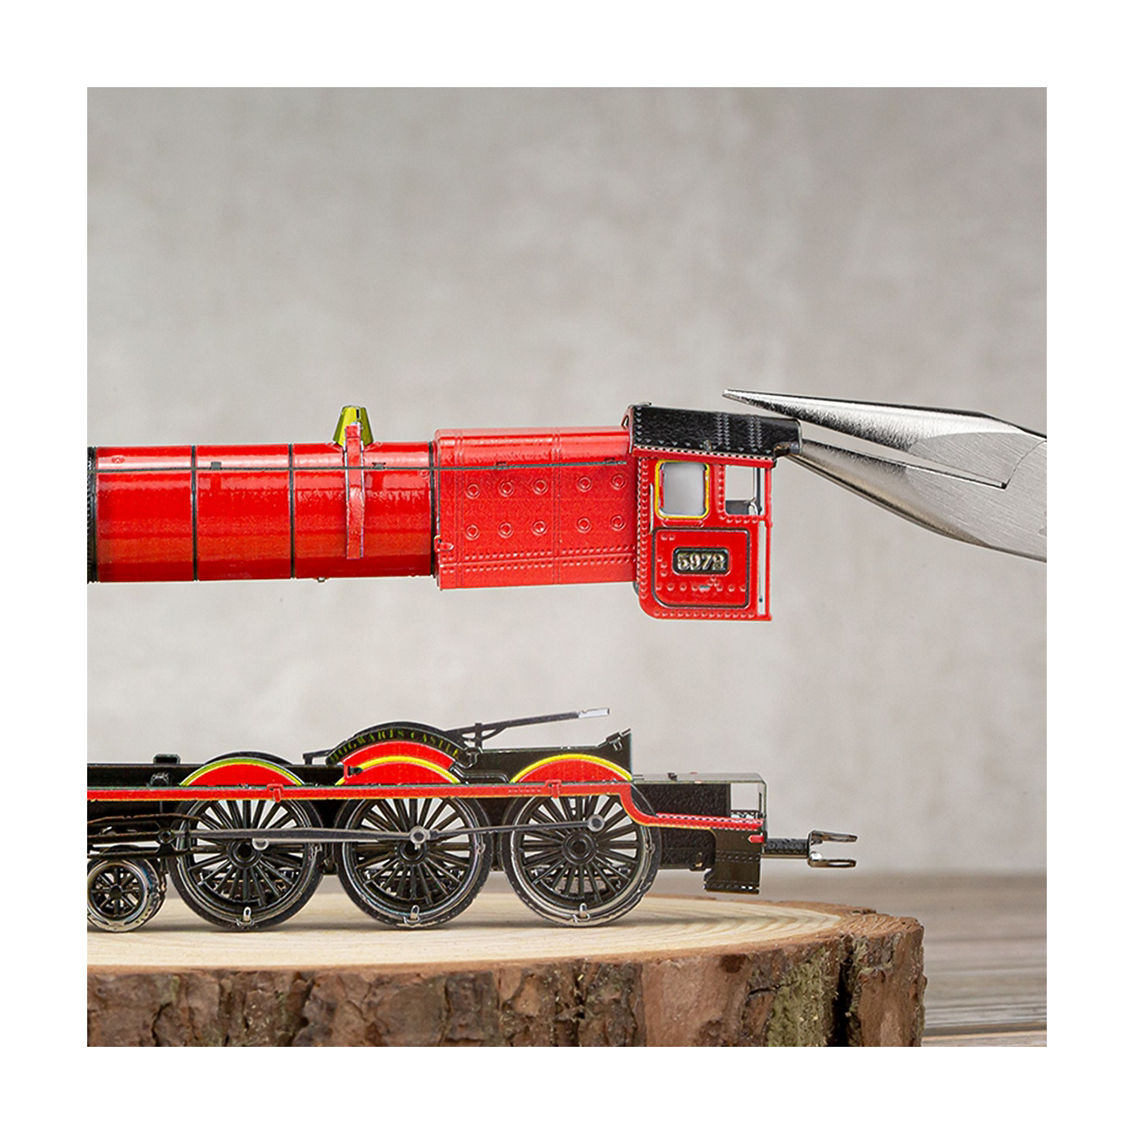 Fascinations Metal Earth 3D Model Kit - Harry Potter Hogwarts Express with Track - Image 5 of 5